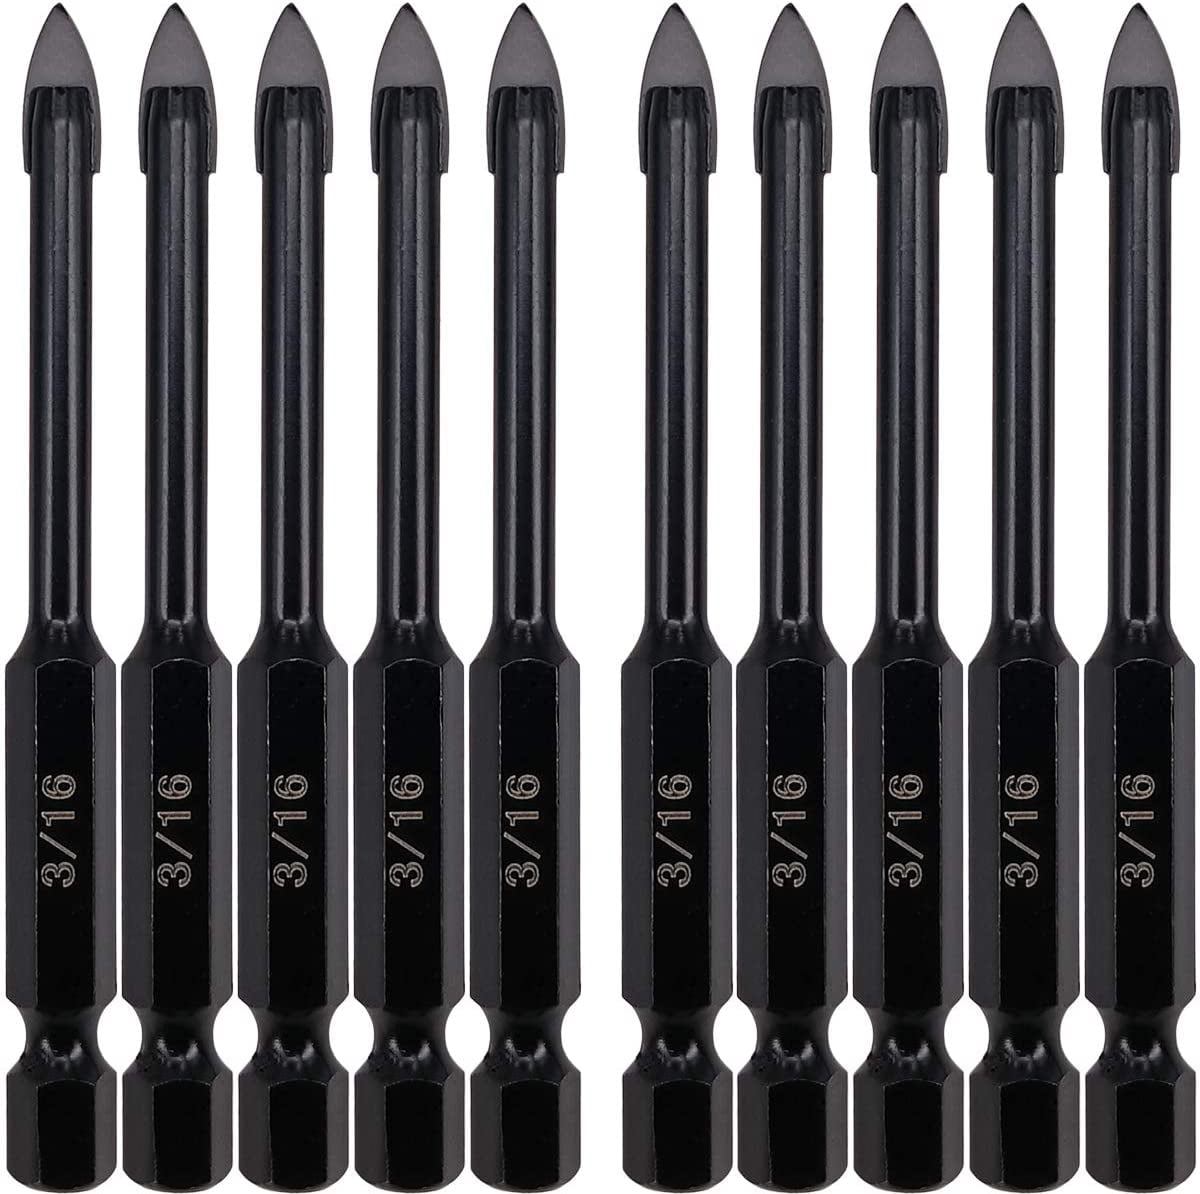 Cinderblock and Wood Carbide Tipped Cutter Plastic Cement Hymnorq Masonry Drill Bits 10PC Set 5 Sizes 1/8 1/4 5/16 3/8 and 1/2 Inch Brick Packed in Storage Case for Ceramic Tile Terracotta Concrete